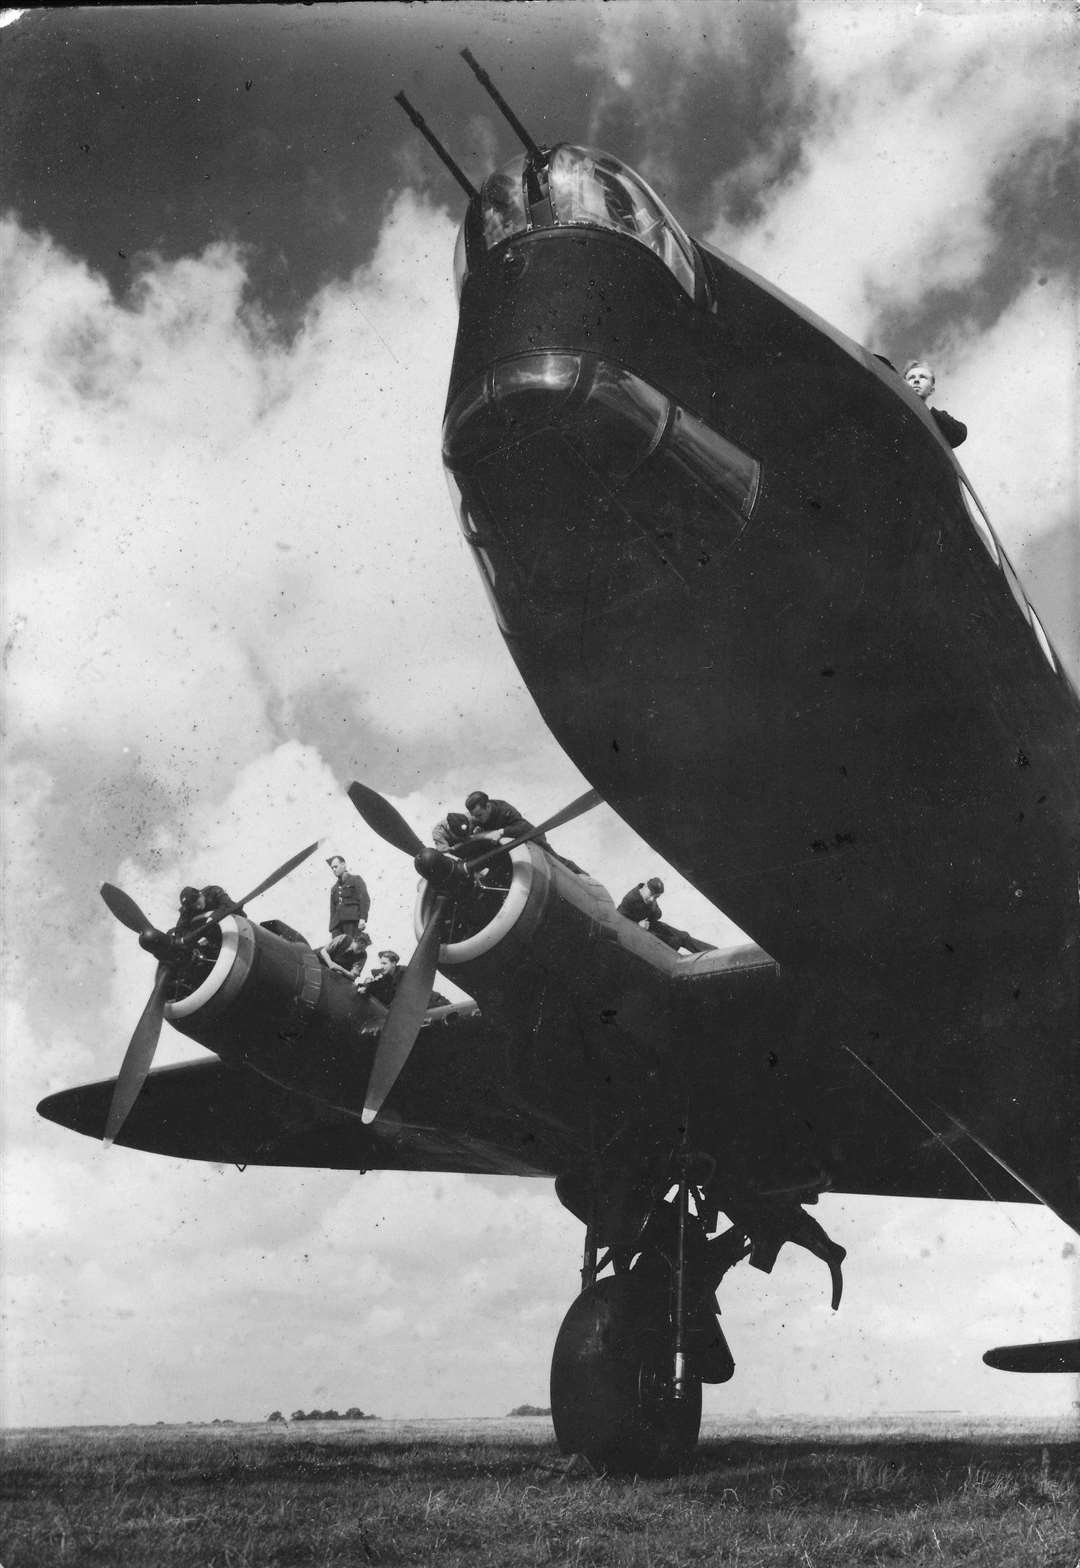 A Stirling bomber being worked on by ground crew. The Stirling, developed by the Rochester company Short Bros, was the first four engine bomber to take to the air. Later in the War it was used as a glider tug